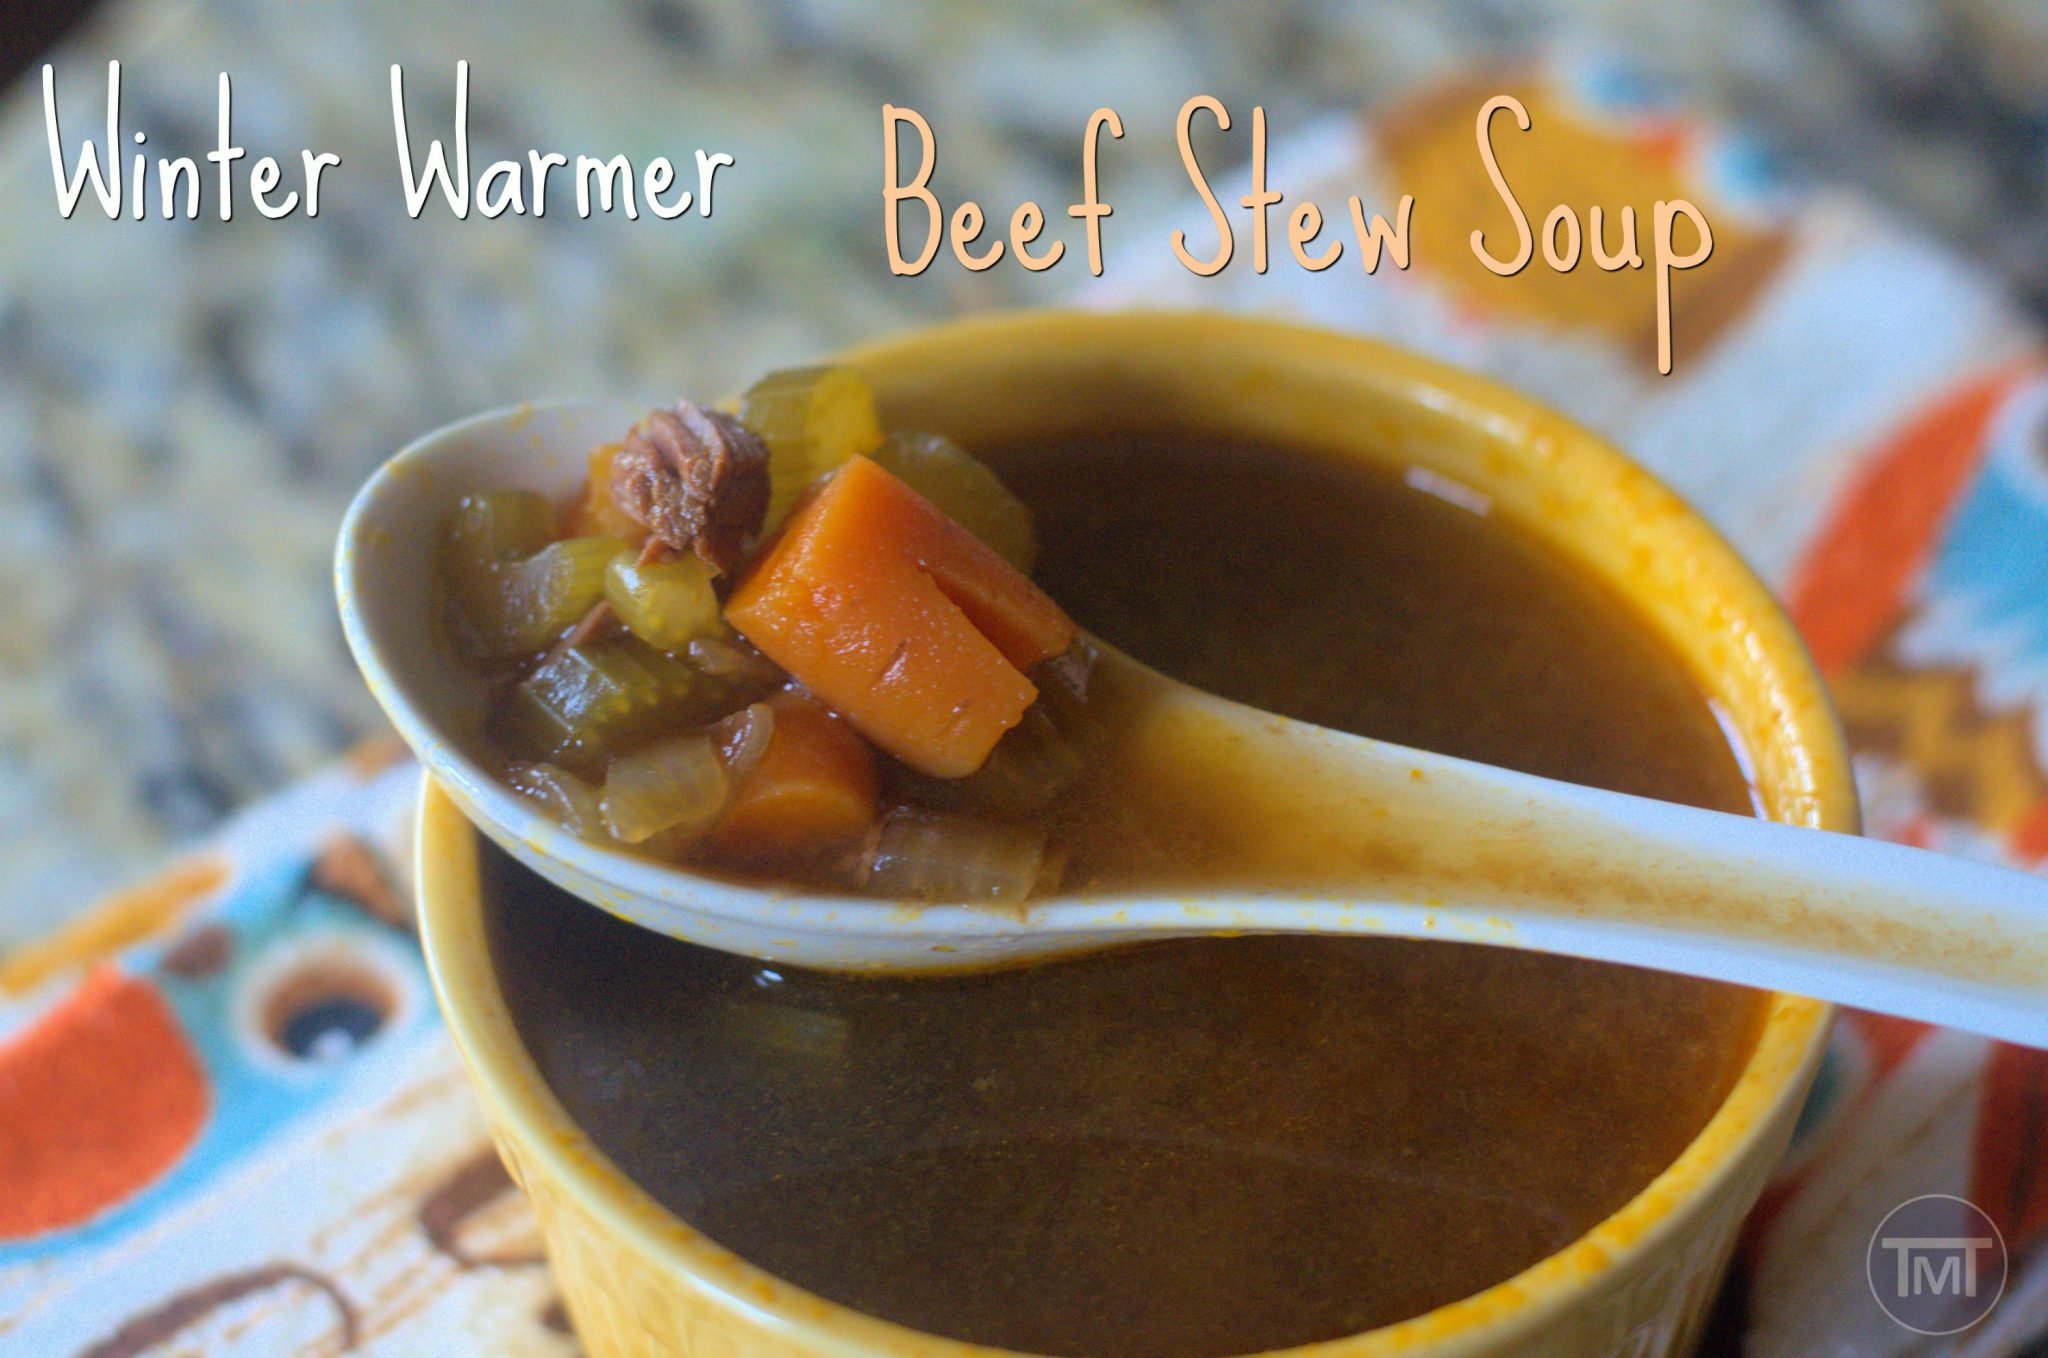 Winter is coming and as a cold person I need to warm myself up from the inside, this is where this delicious beef stew soup comes in, perfect for the cold!